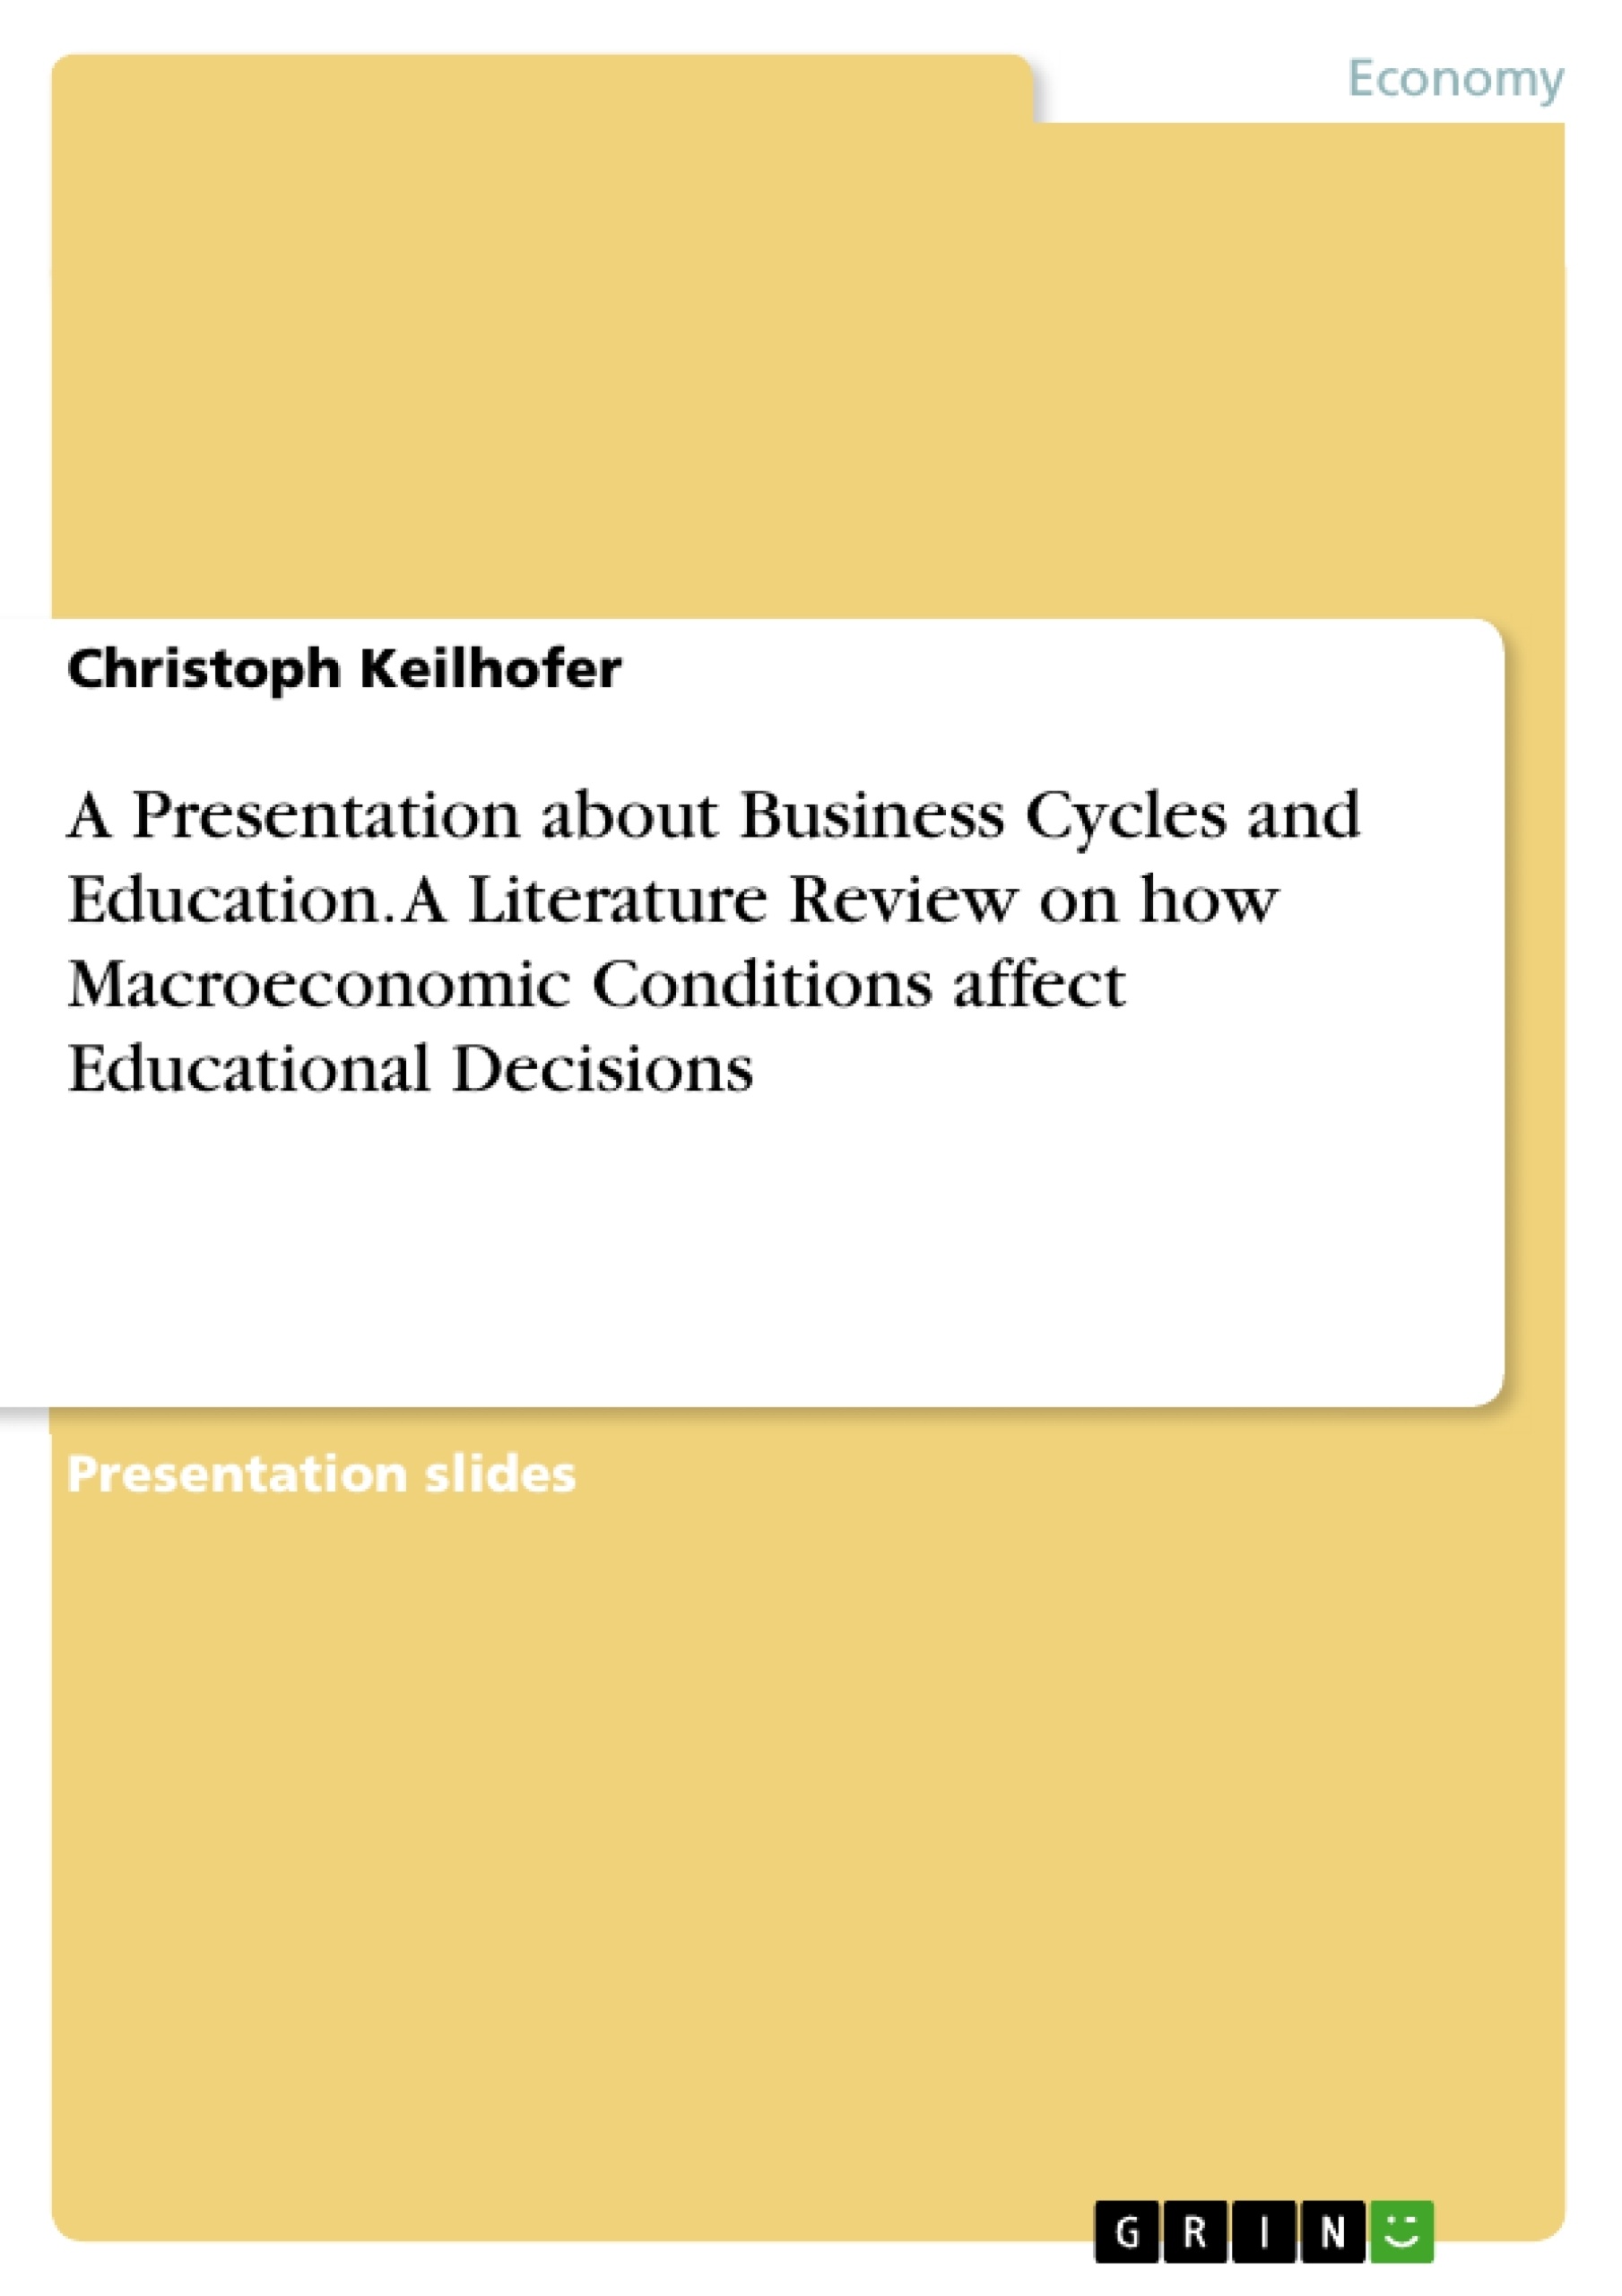 Title: A Presentation about Business Cycles and Education. A Literature Review on how Macroeconomic Conditions affect Educational Decisions